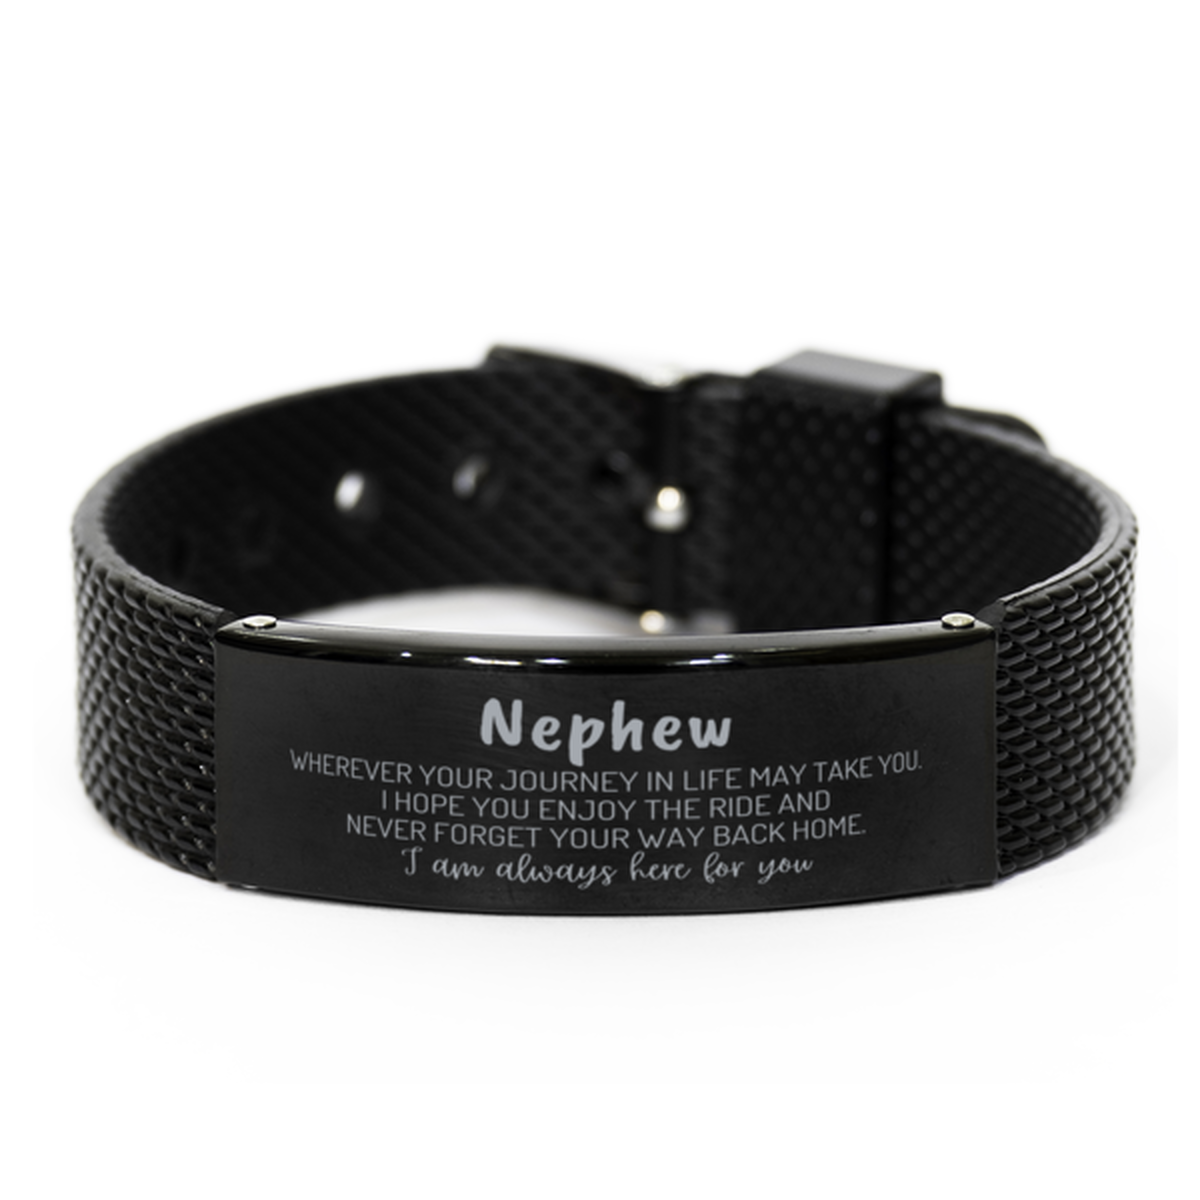 Nephew wherever your journey in life may take you, I am always here for you Nephew Black Shark Mesh Bracelet, Awesome Christmas Gifts For Nephew, Nephew Birthday Gifts for Men Women Family Loved One